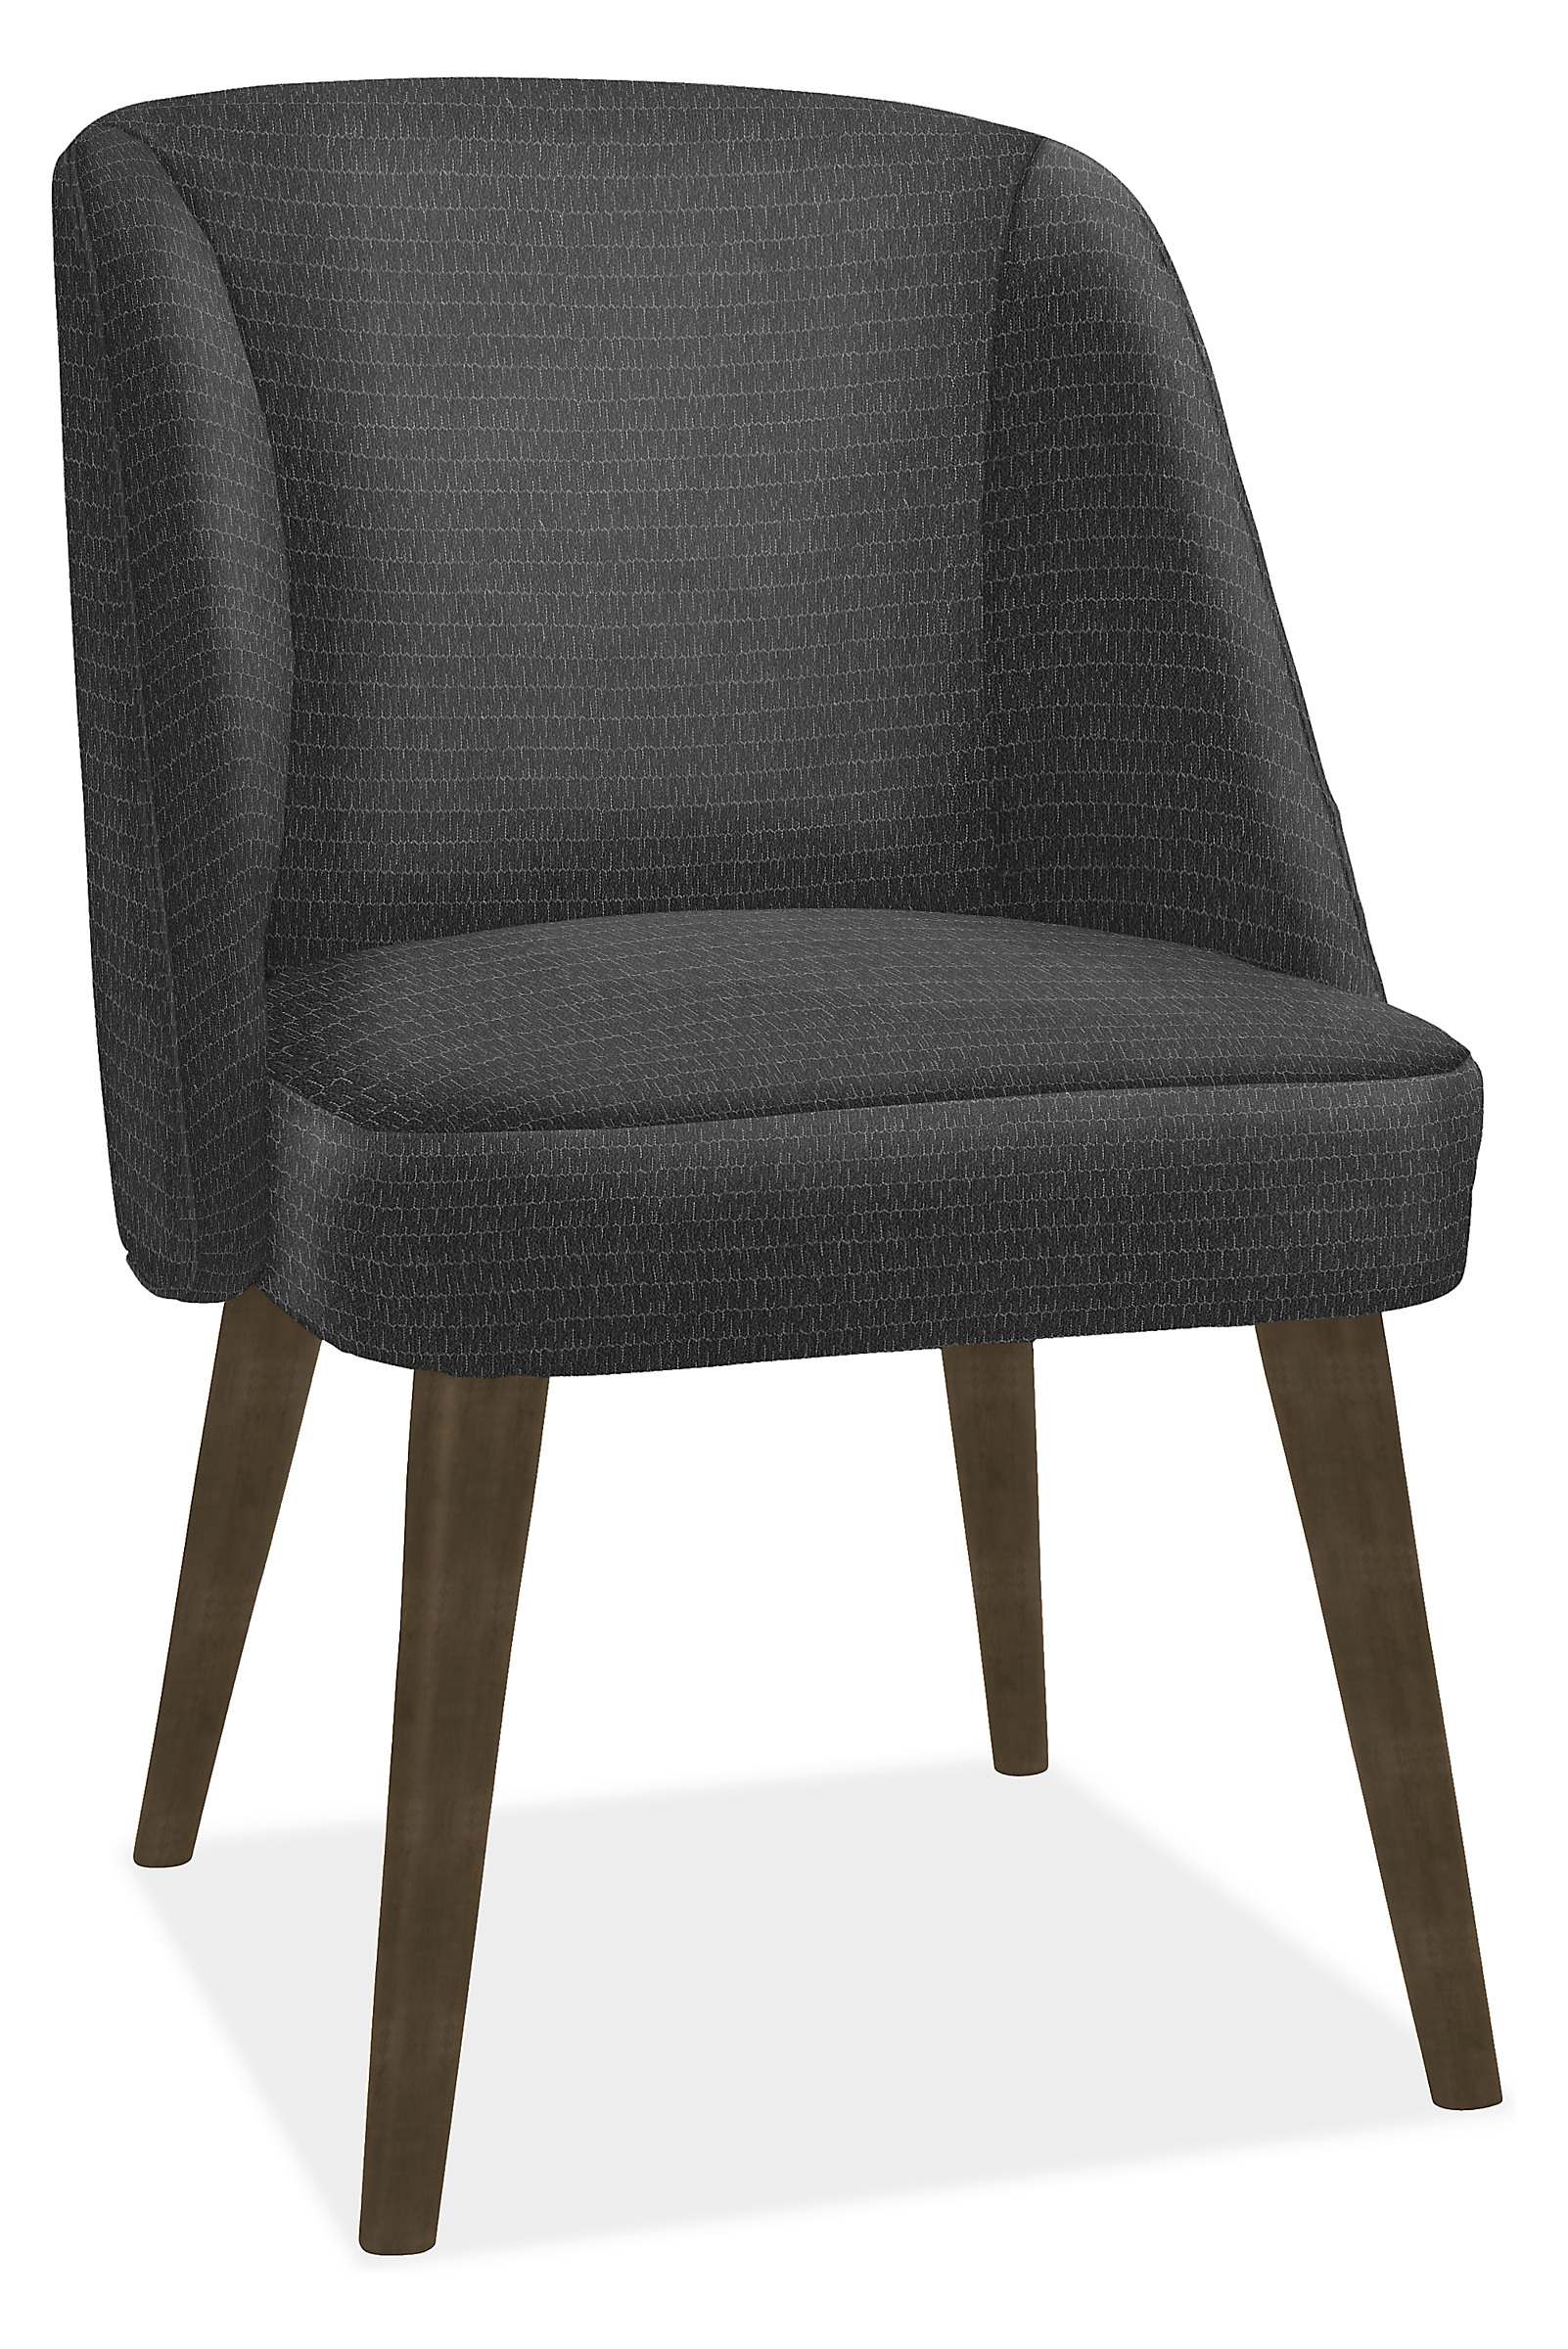 Cora Side Chair in Holtz Charcoal with Charcoal Legs